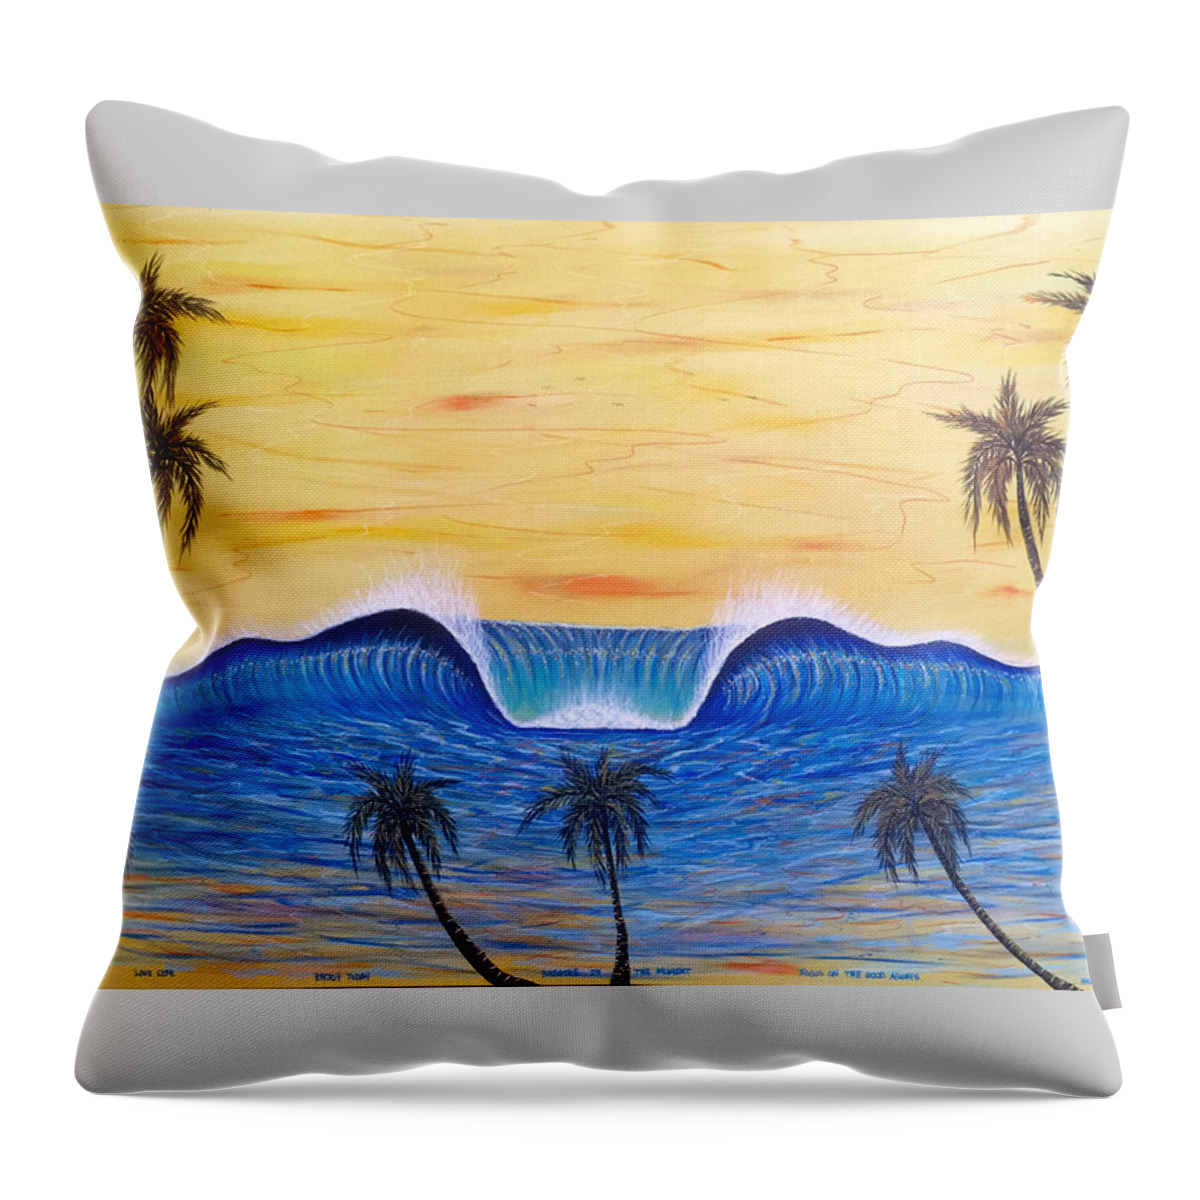 Abstractart Throw Pillow featuring the painting Sunset Surf Dream by Paul Carter